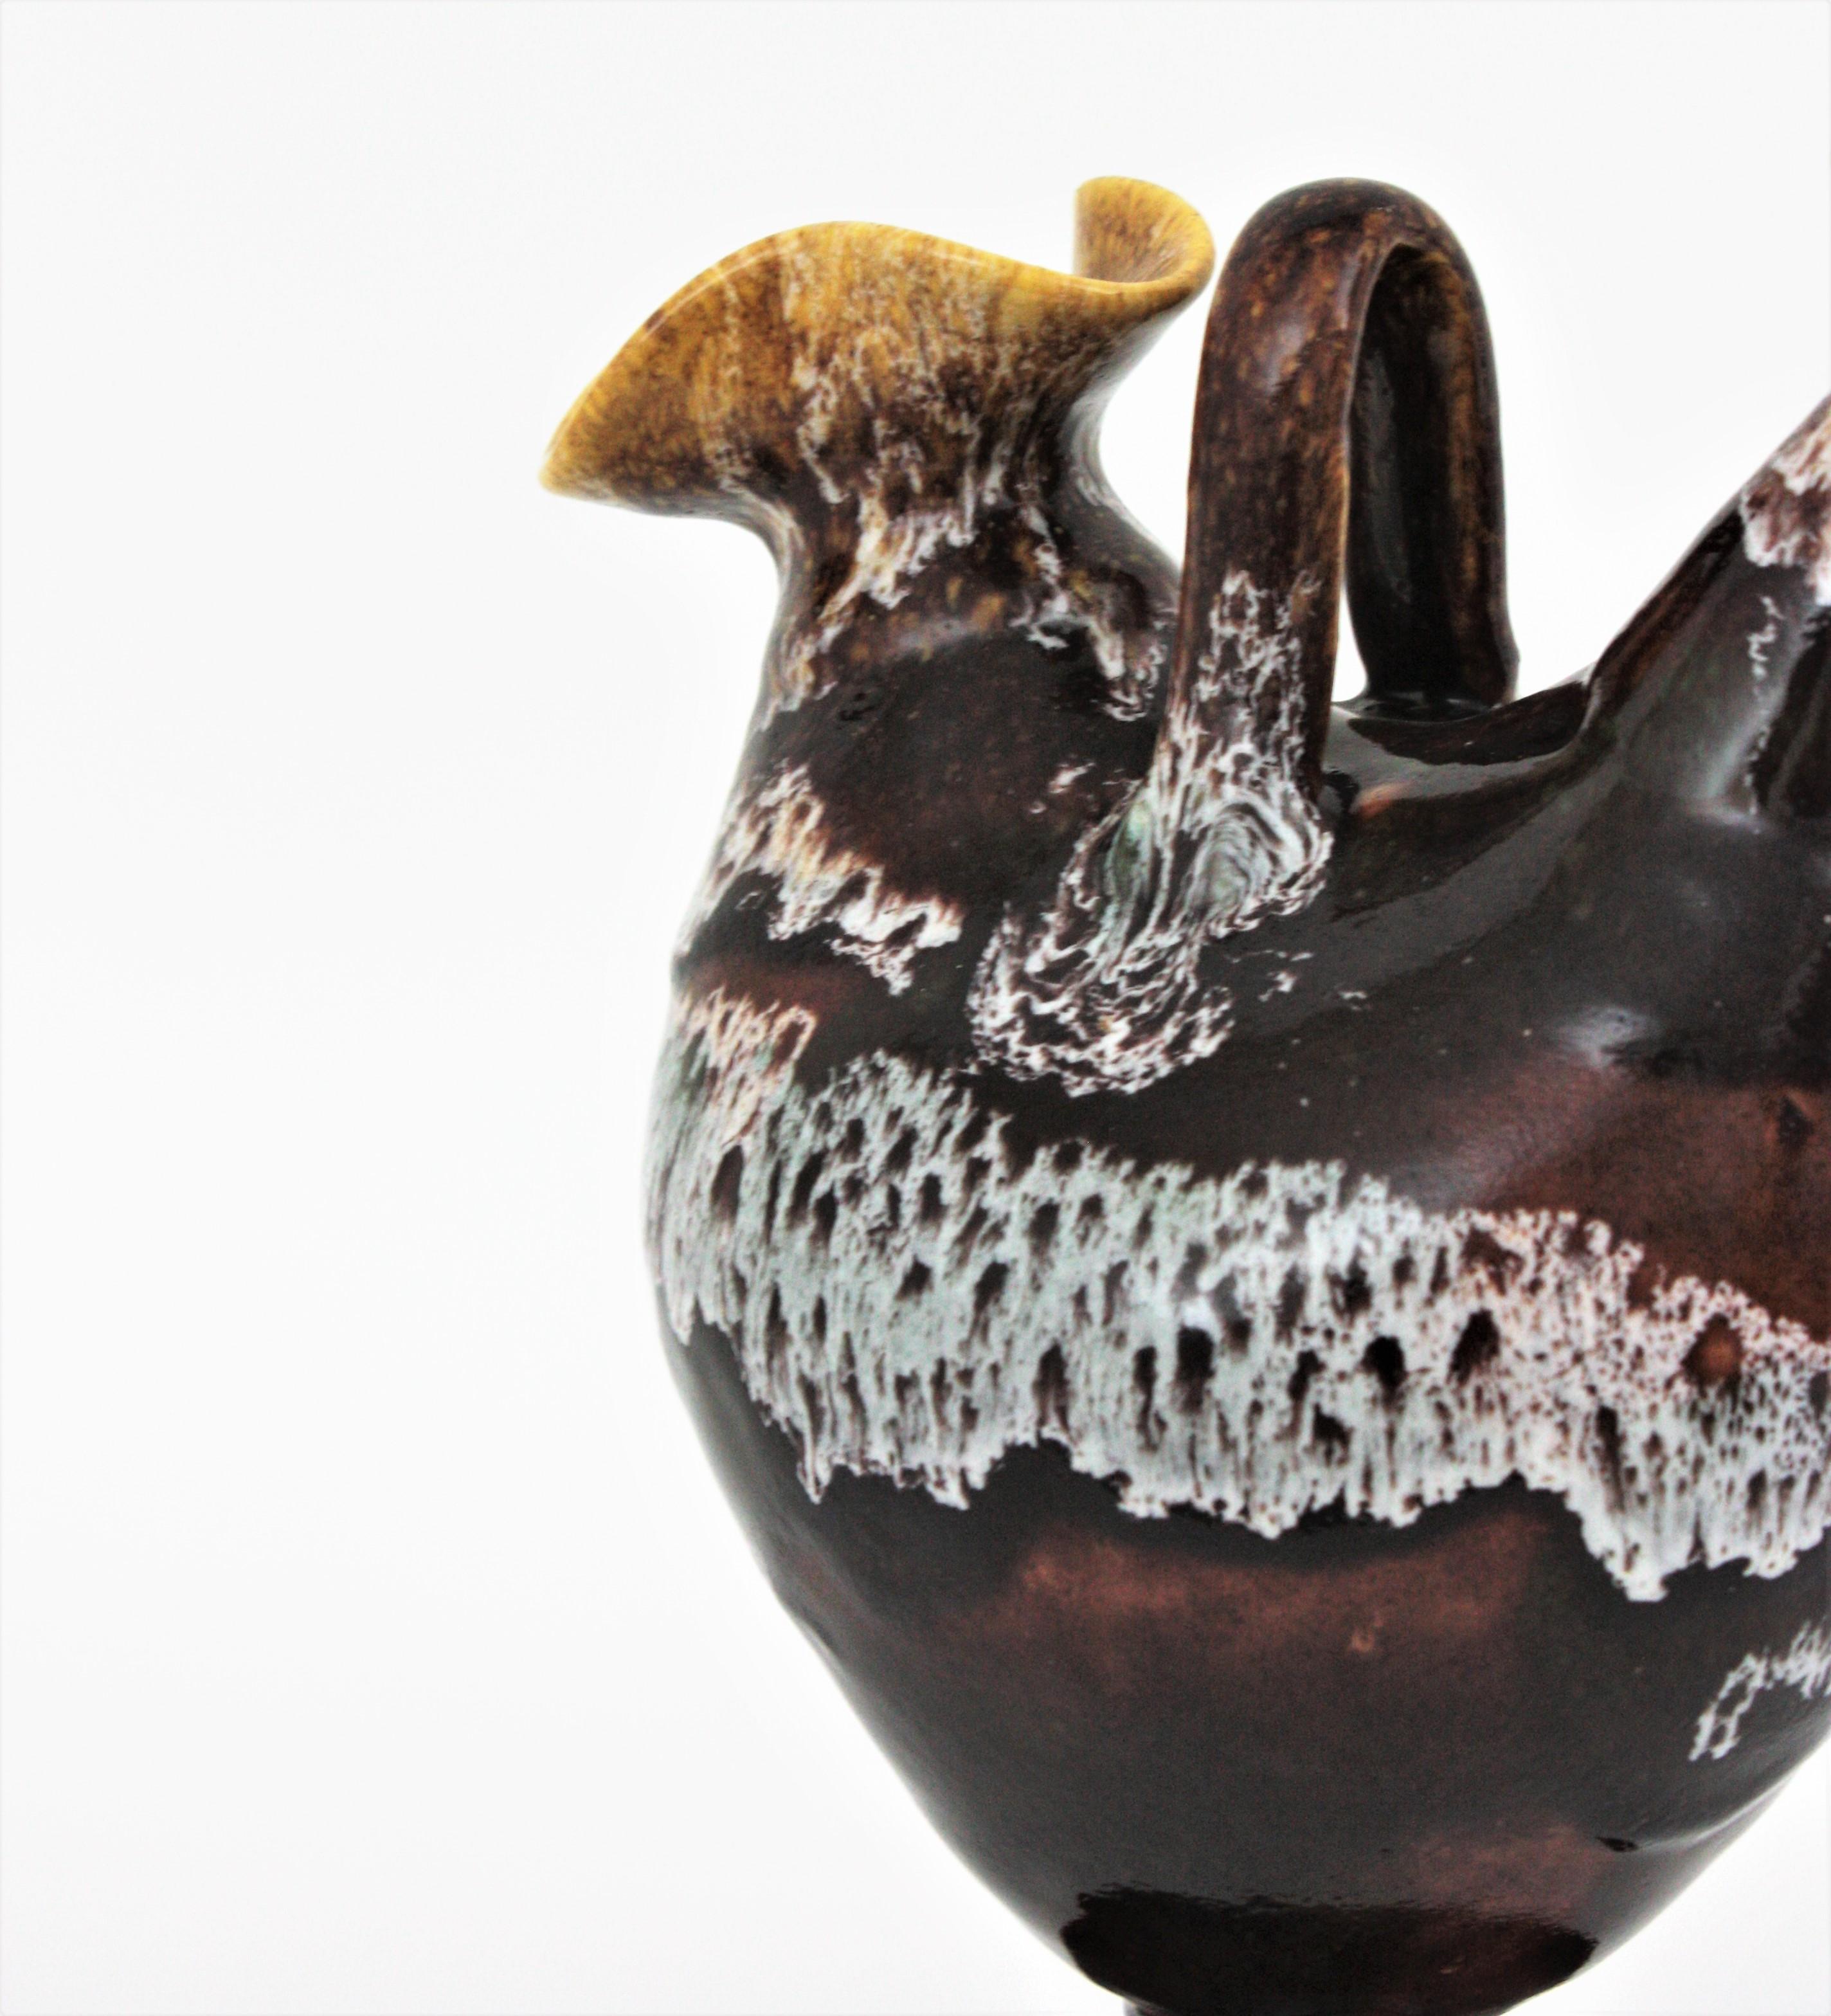 Spanish Rooster Shaped Pitcher in Brown Glazed Ceramic, 1960s For Sale 5